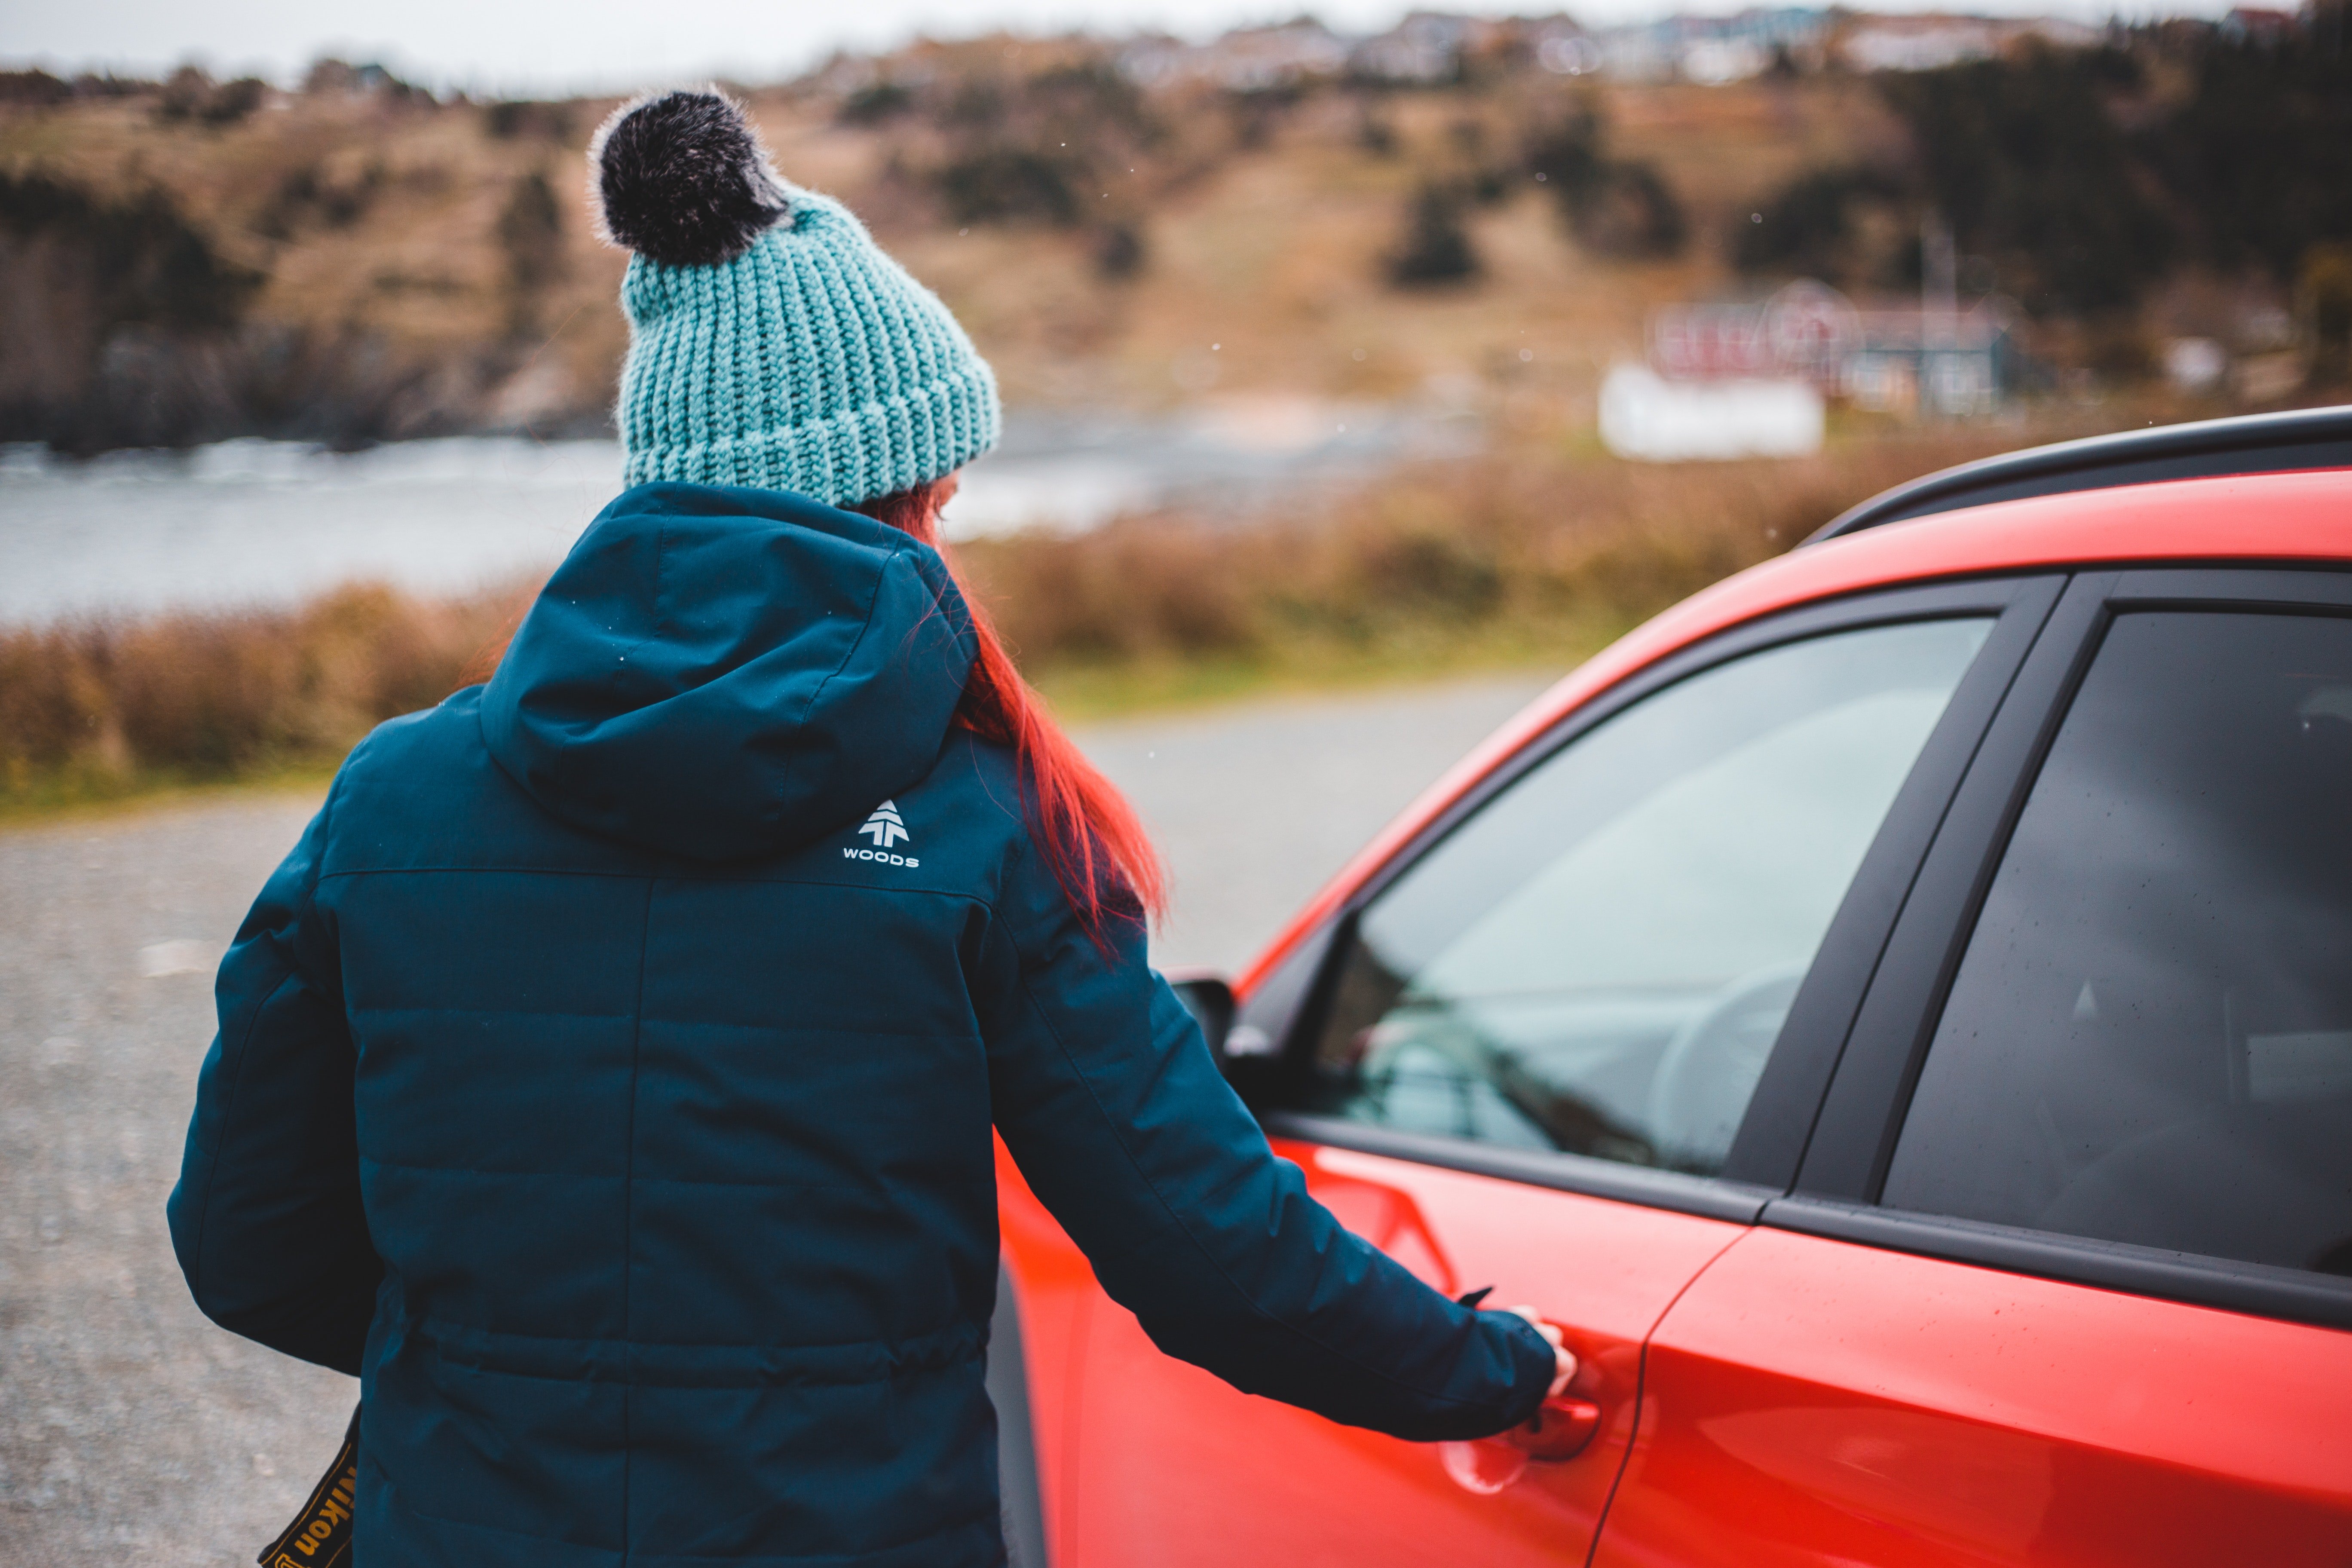 OP's wife was horrified when she found the car empty | Source: Pexels